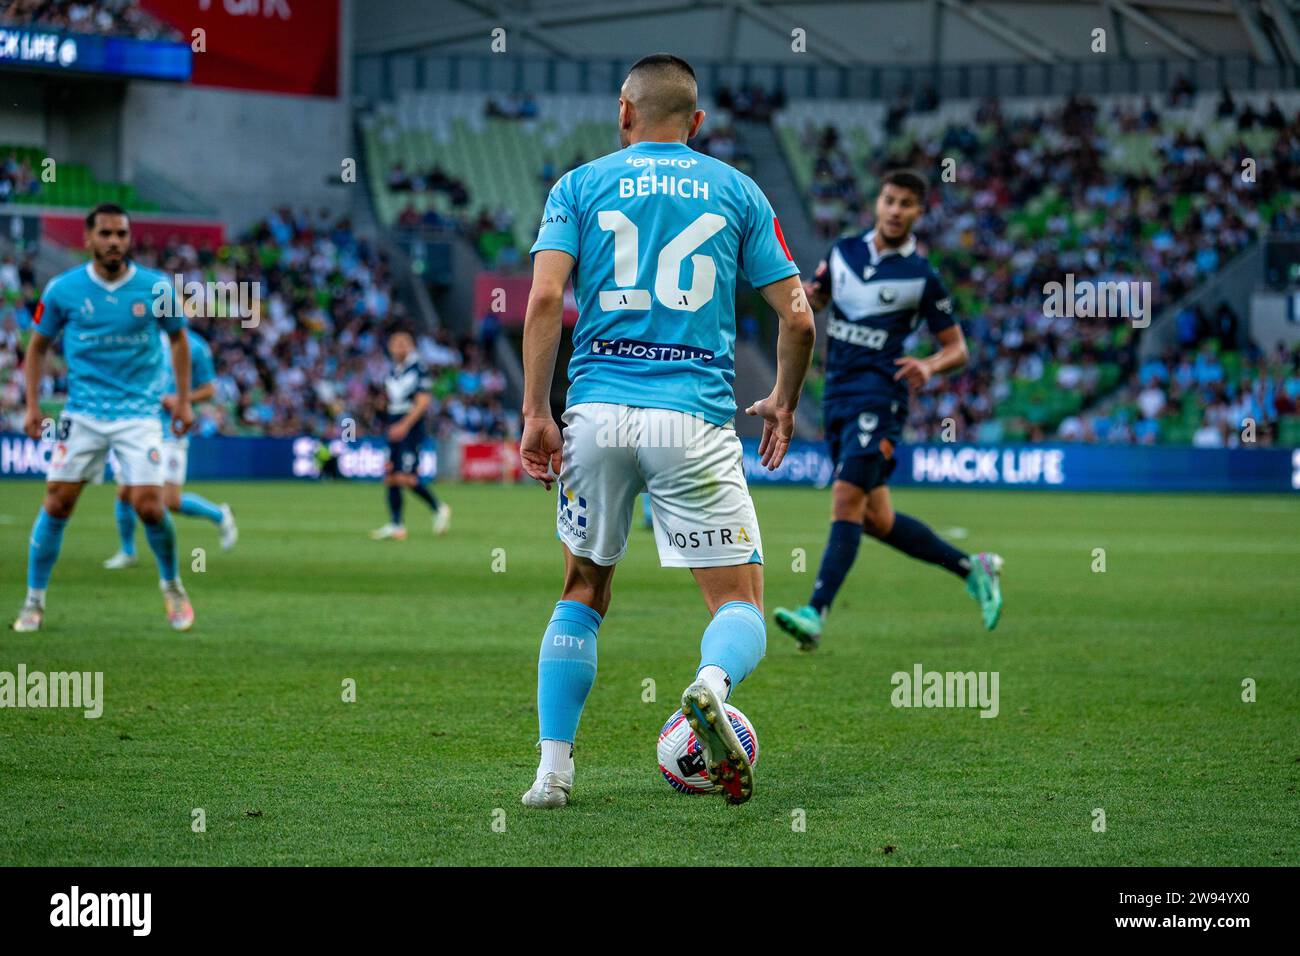 Melbourne, Australia. 23 December, 2023. Melbourne City FC Defender Aziz Behich (#16) looks to play the ball forward during the Isuzu UTE A-League match between Melbourne City FC and Melbourne Victory FC at AAMI Park in Melbourne, Australia. Credit: James Forrester/Alamy Live News Stock Photo